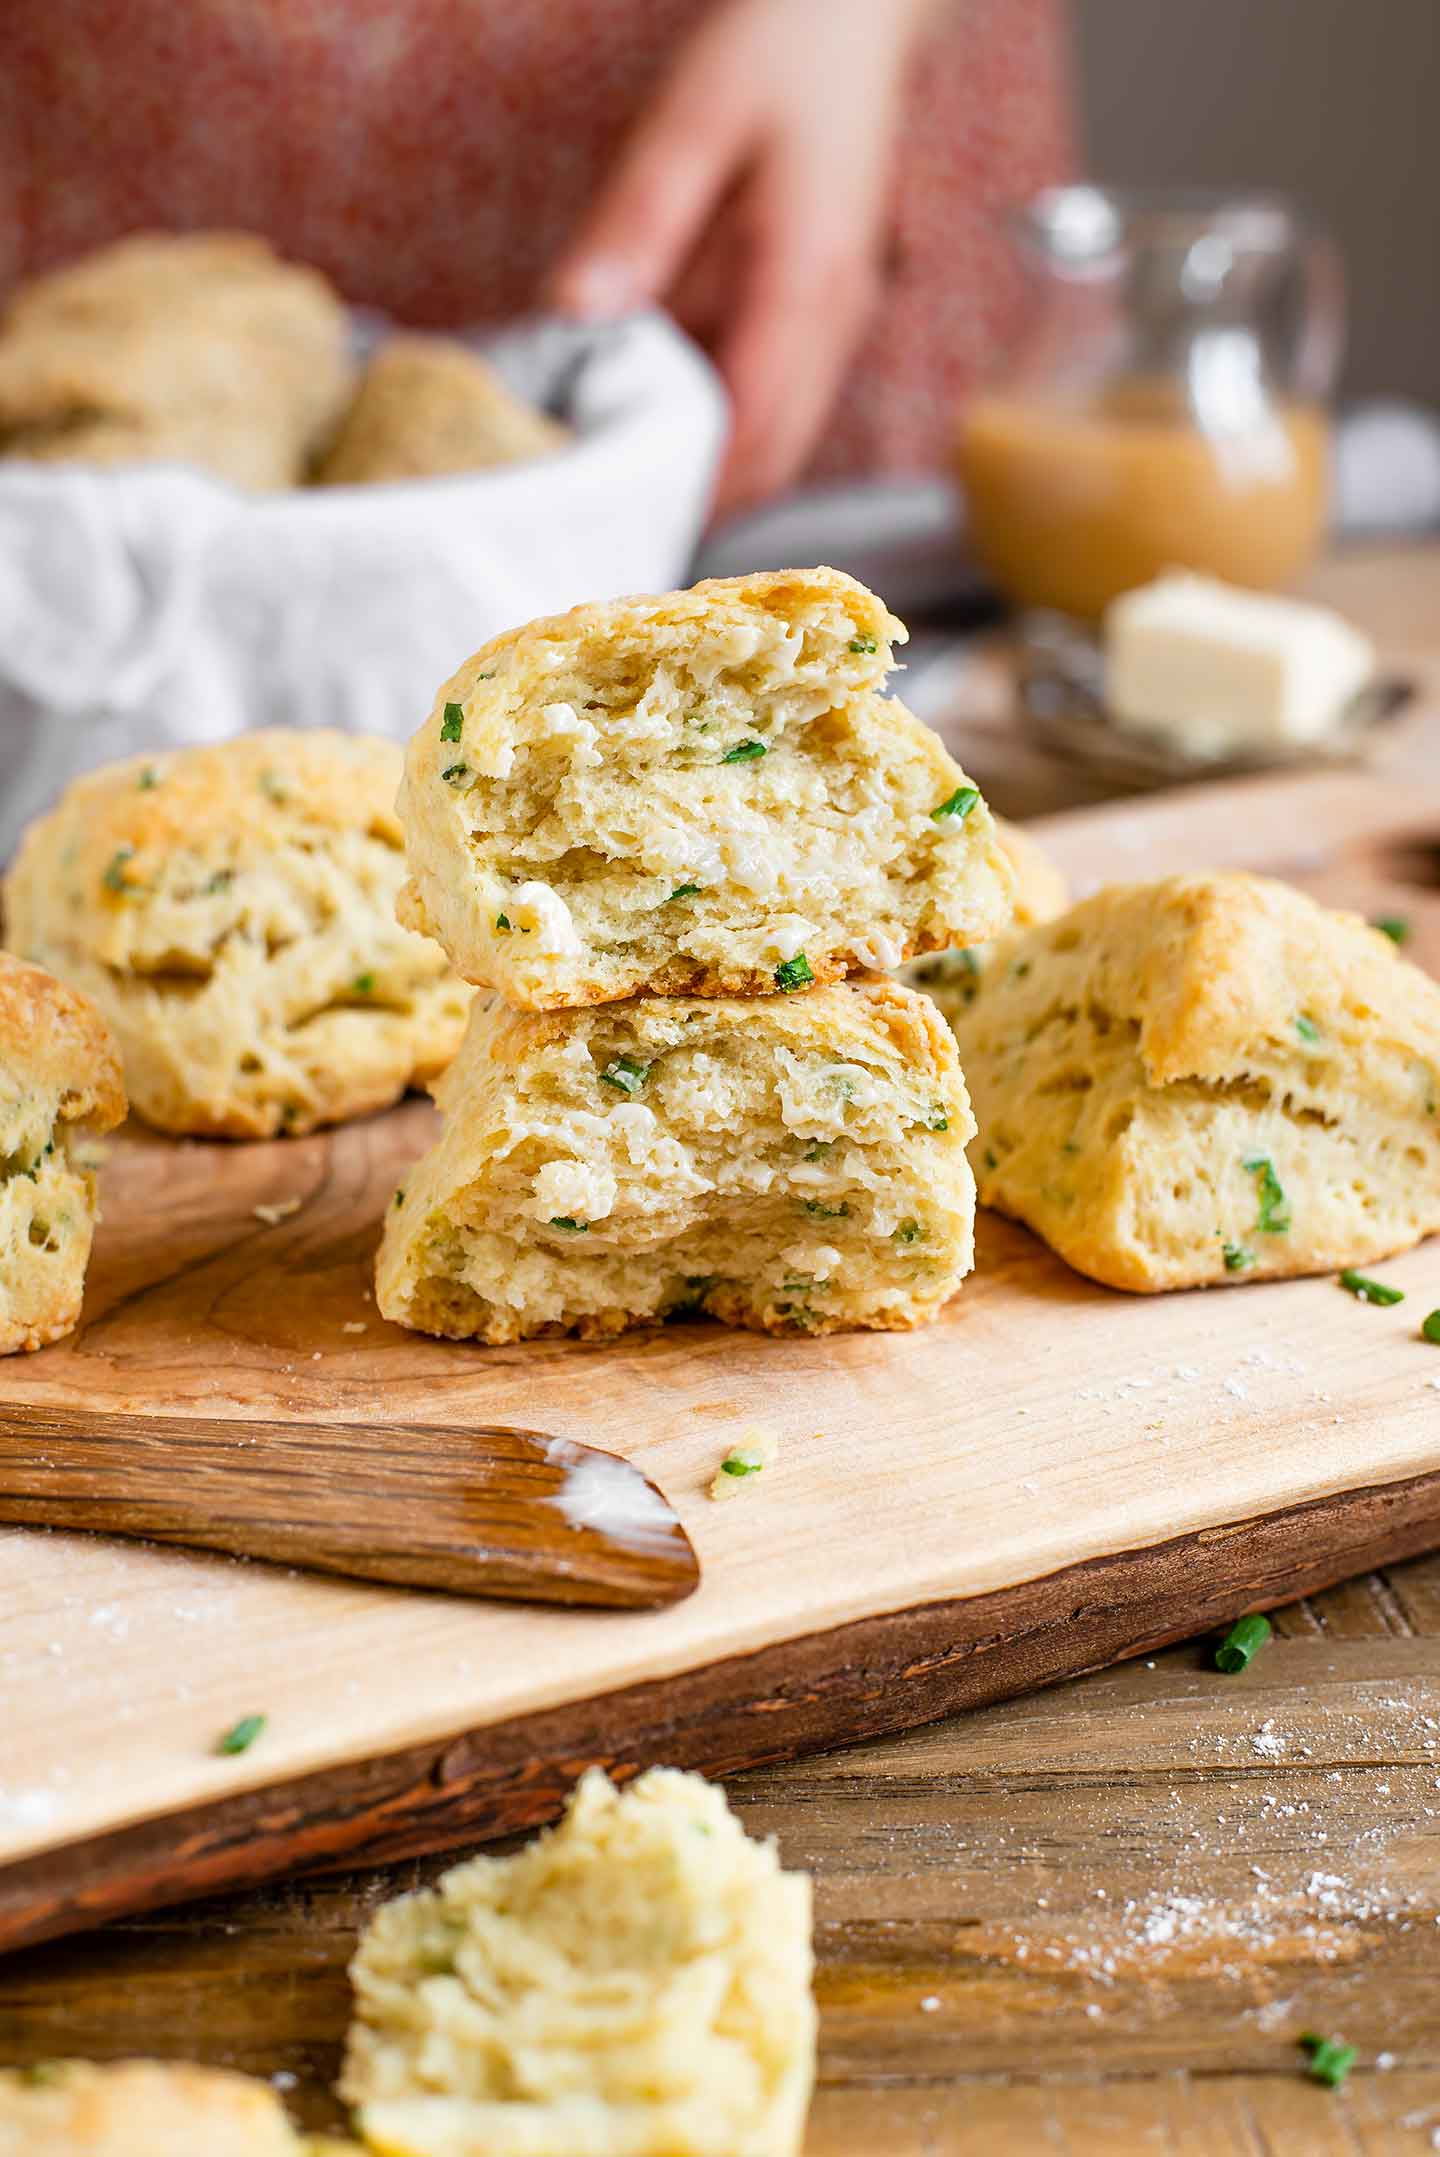 Two halves of a flaky vegan biscuit rest on top of one another to show the layered texture. The biscuit is golden on top and speckled with chives.